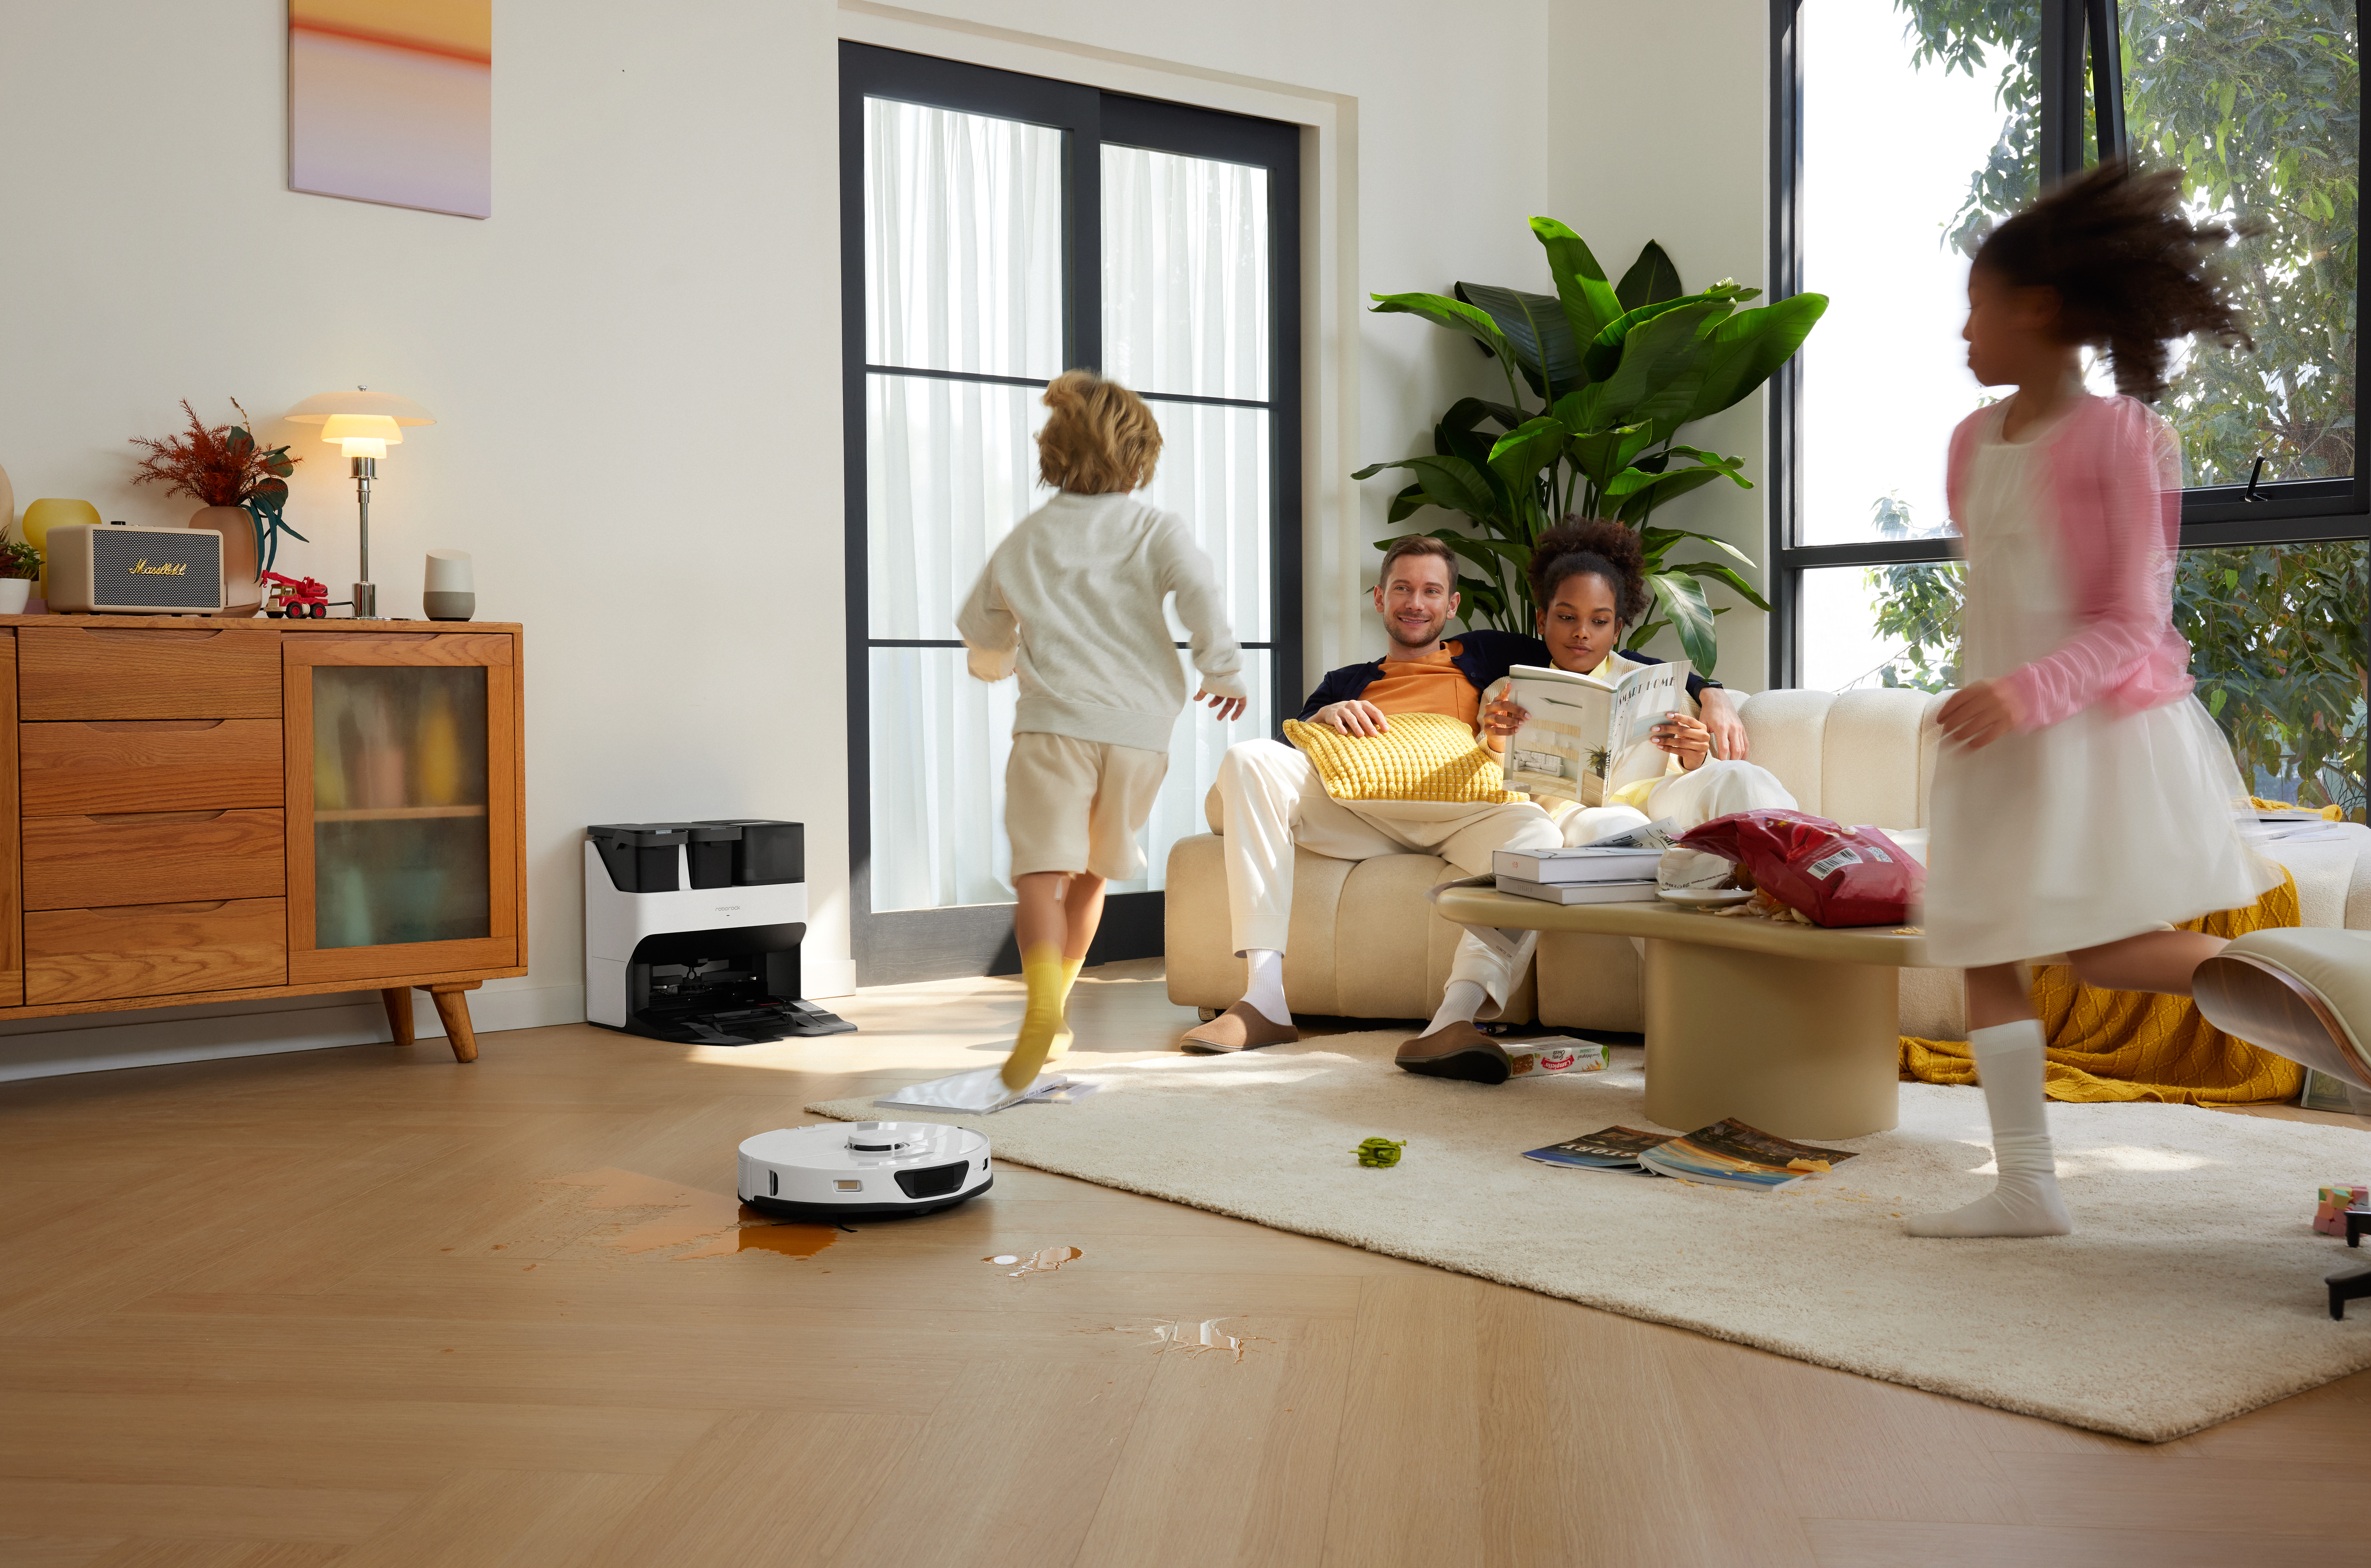 It’s Your Last Chance to Save on the Robot Cleaner That Will Keep Your Place Cleaner Than Ever